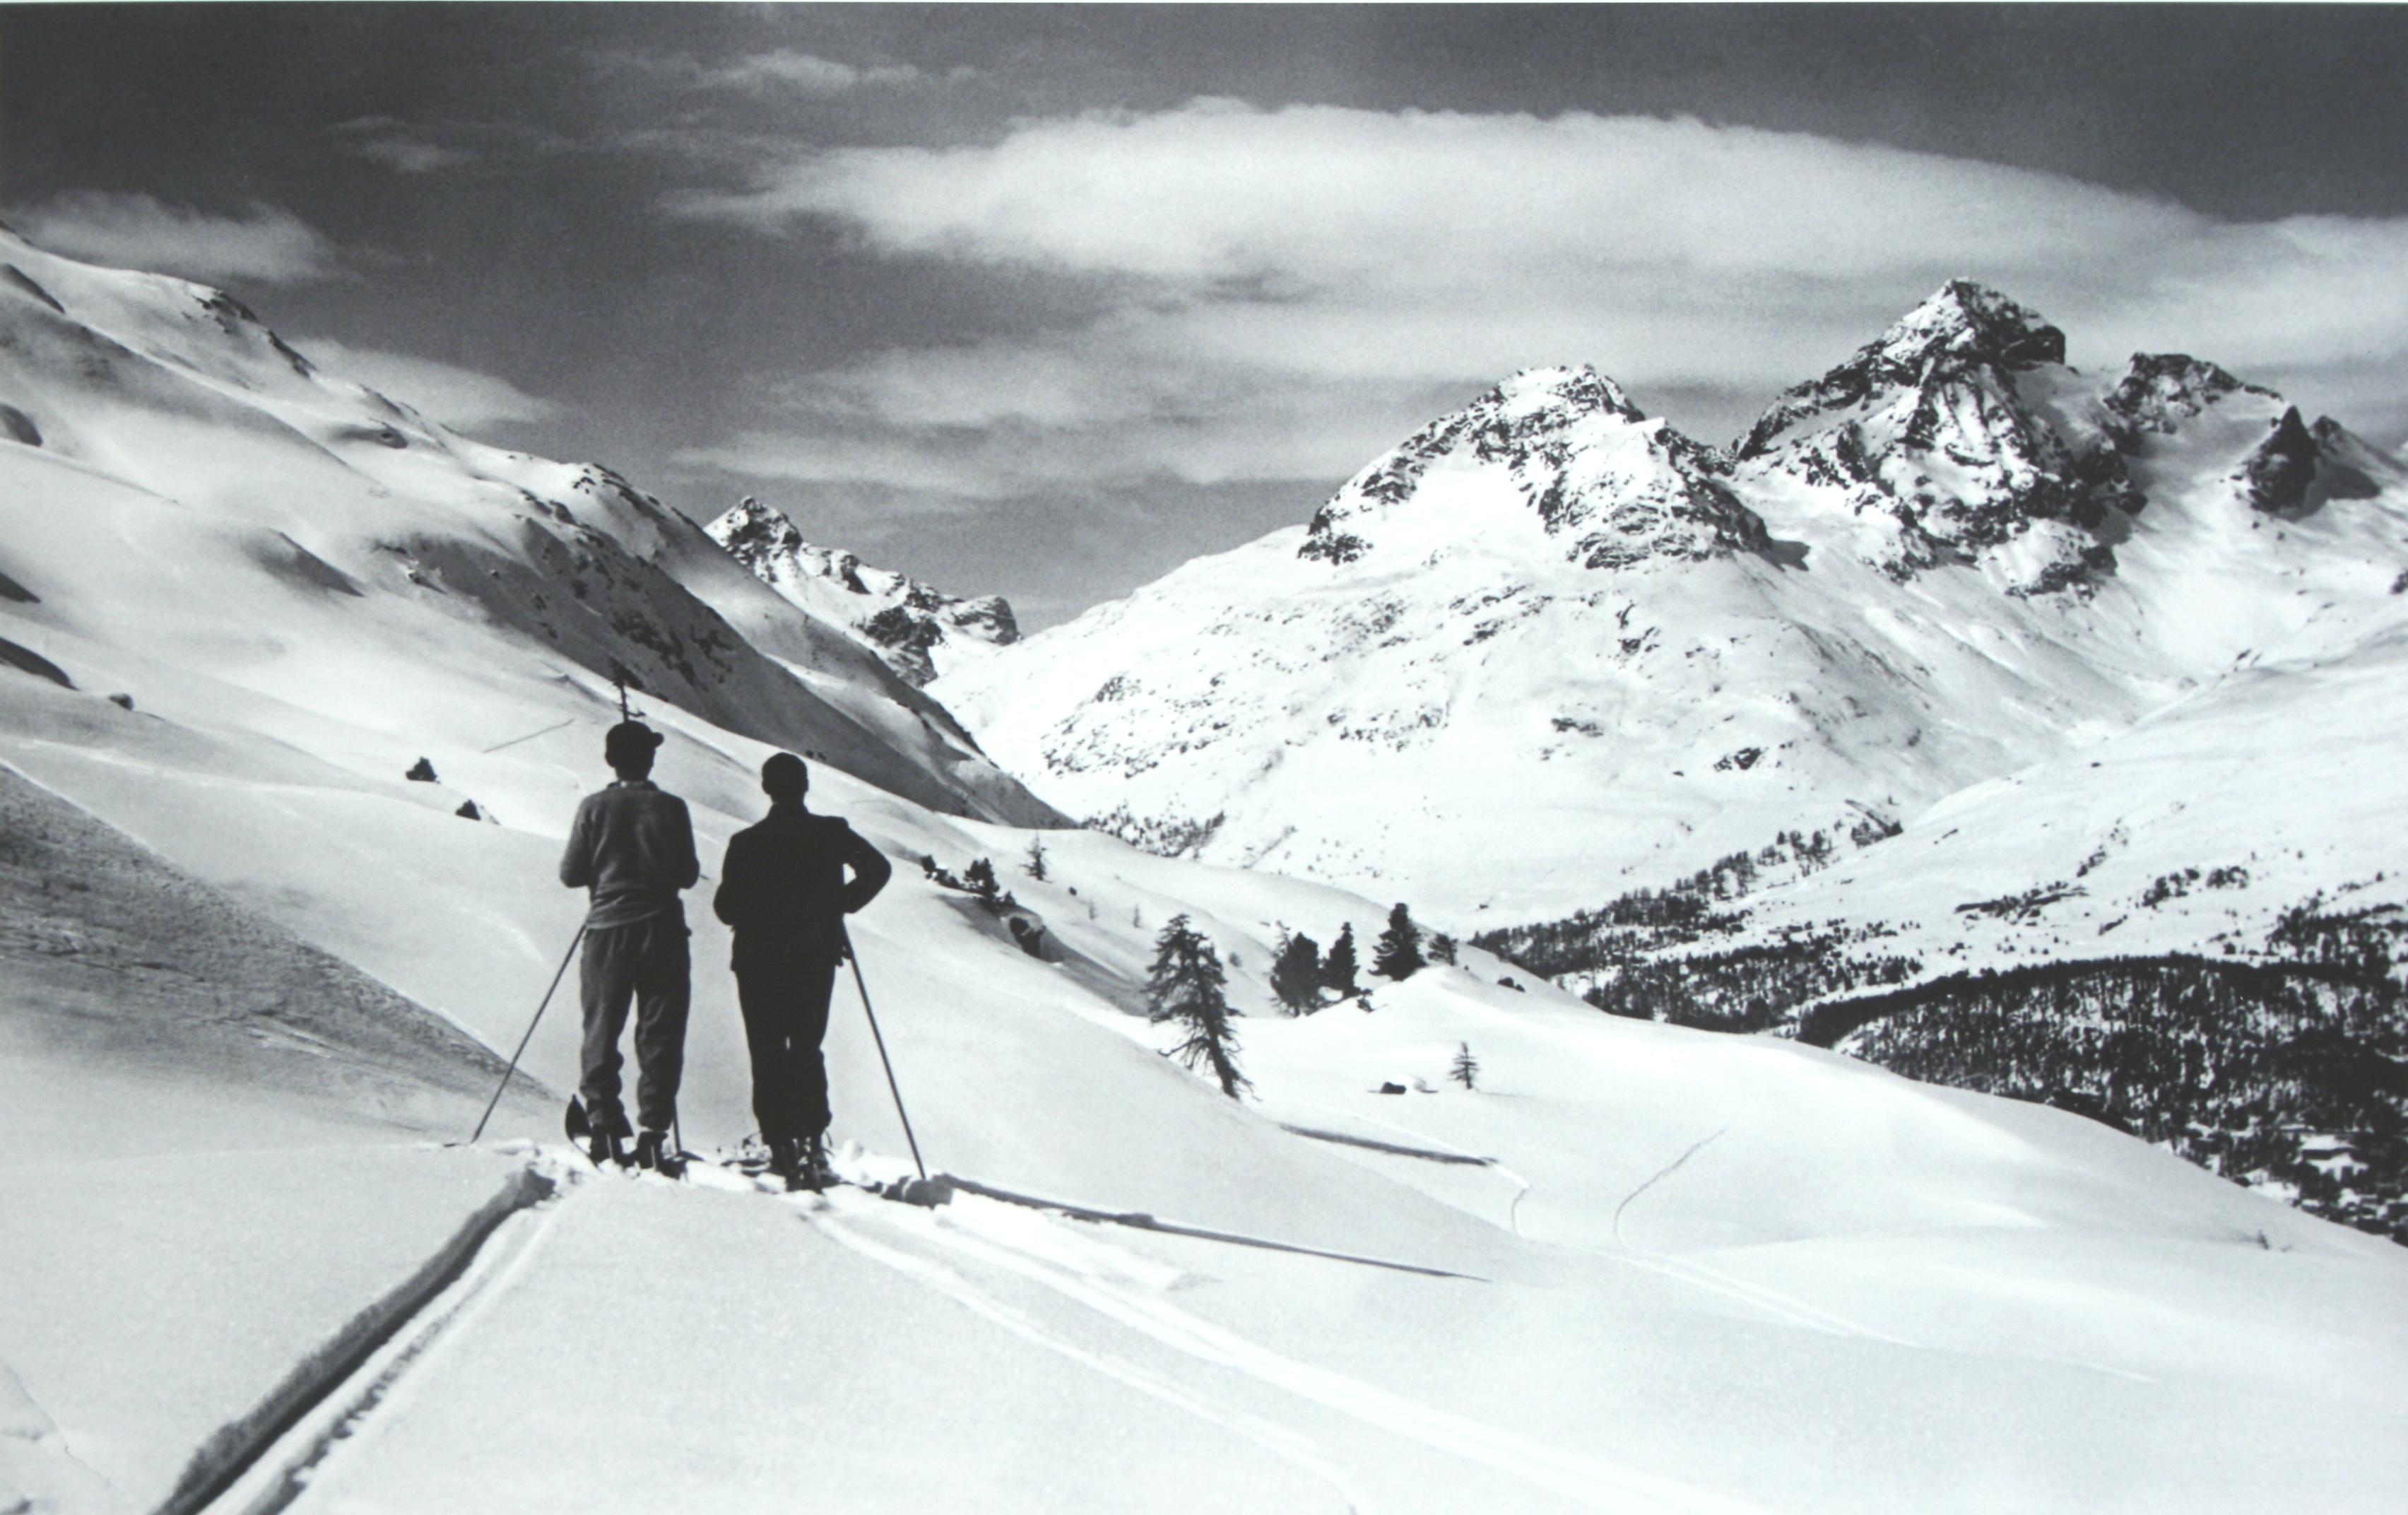 Vintage, antique Alpine Ski photograph.
'Panoramic View', a new mounted black and white photographic image after an original 1930s skiing photograph. Black and white alpine photos are the perfect addition to any home or ski lodge, so please do